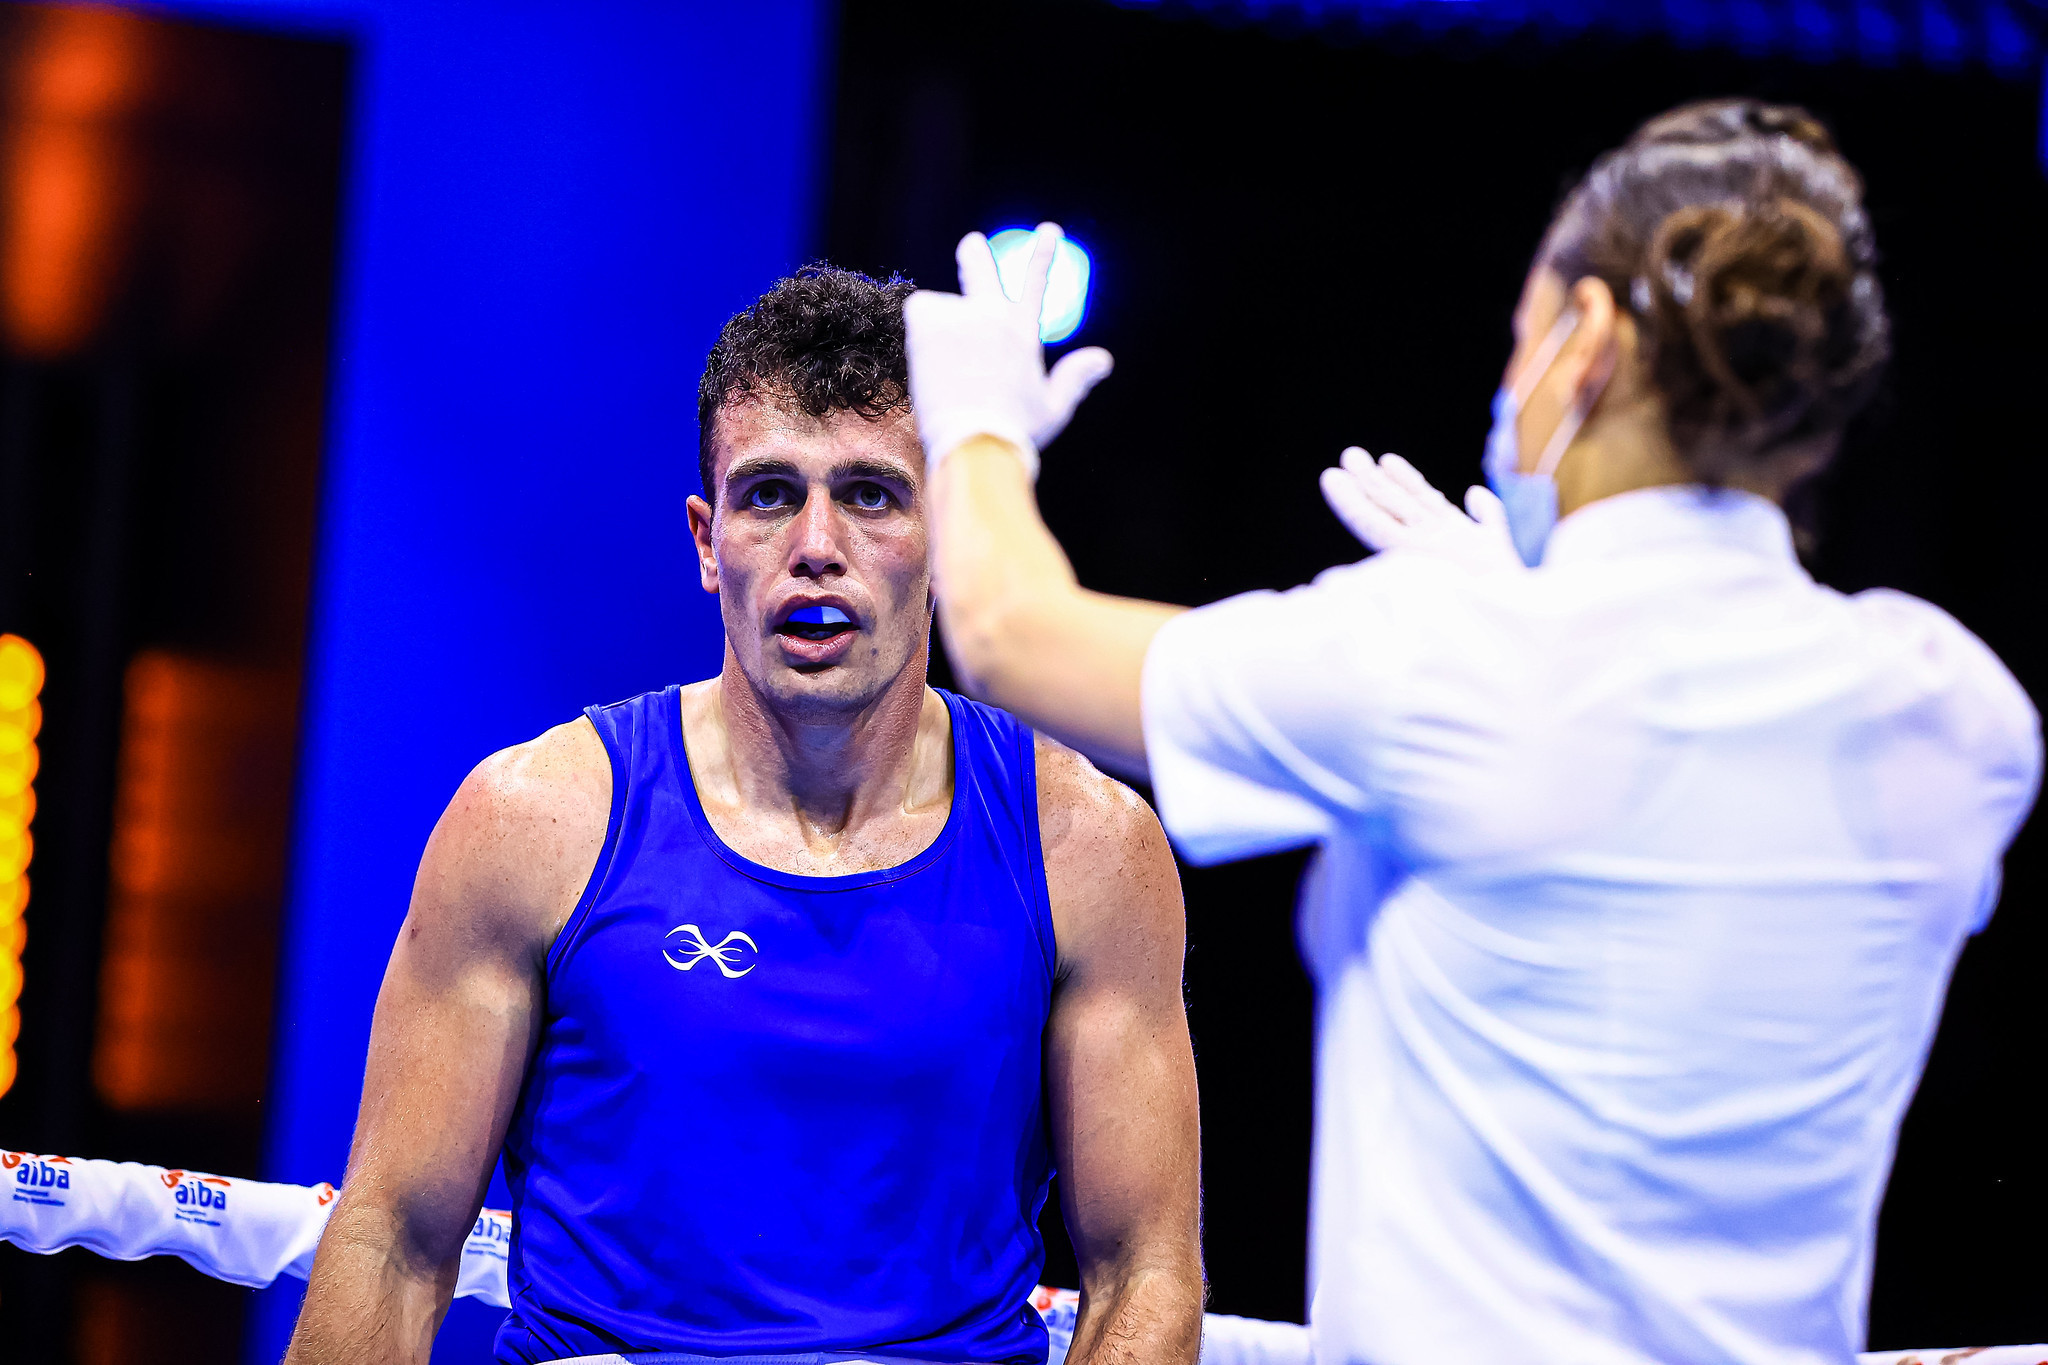 England's George Crotty's bout against Kyrgyzstan's Omurbek Bekzhigit turned against him when he was knocked down ©AIBA